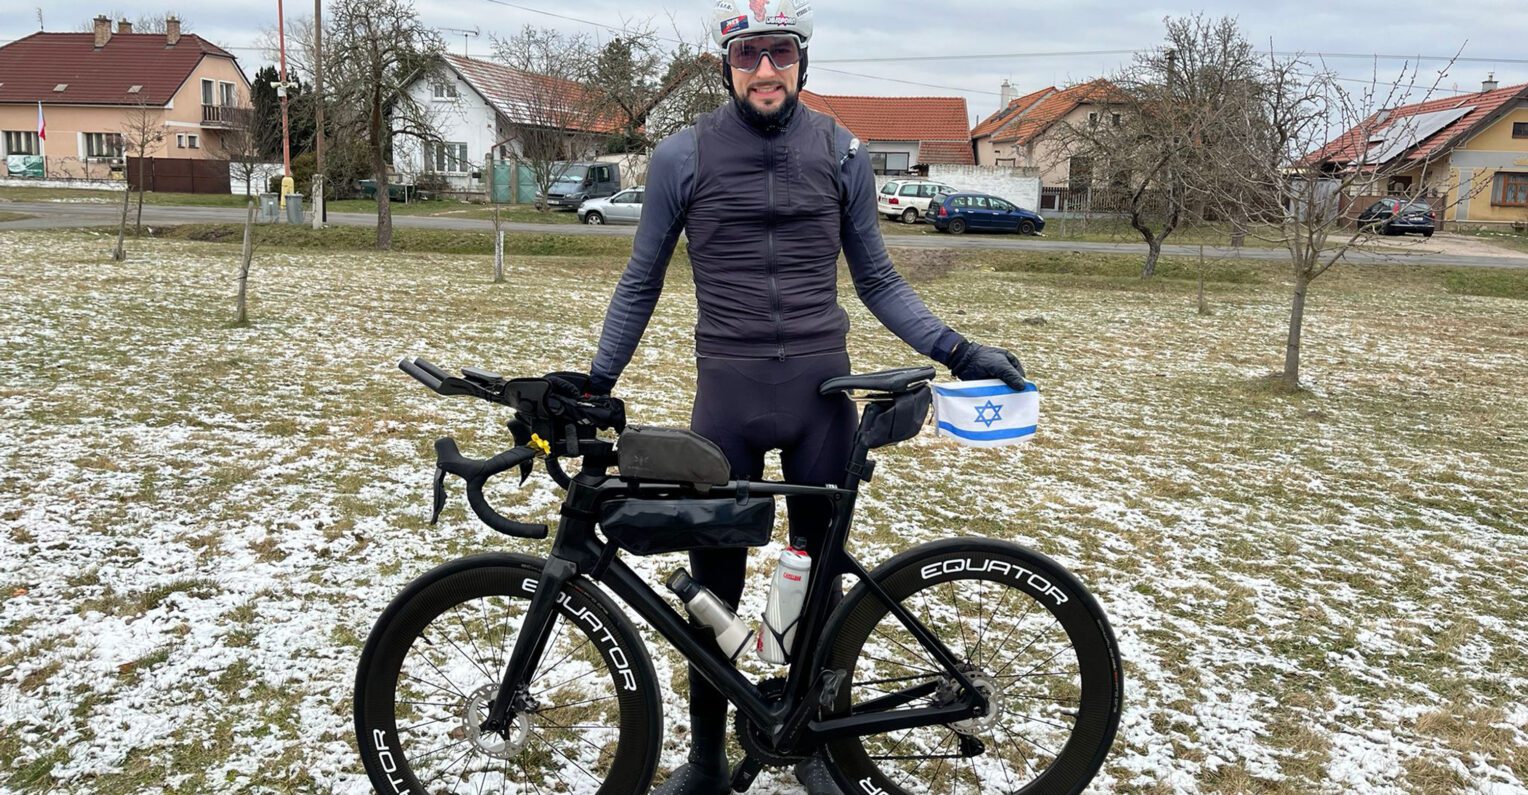 Lukáš Klement ahead of his 24-hour cycling challenge